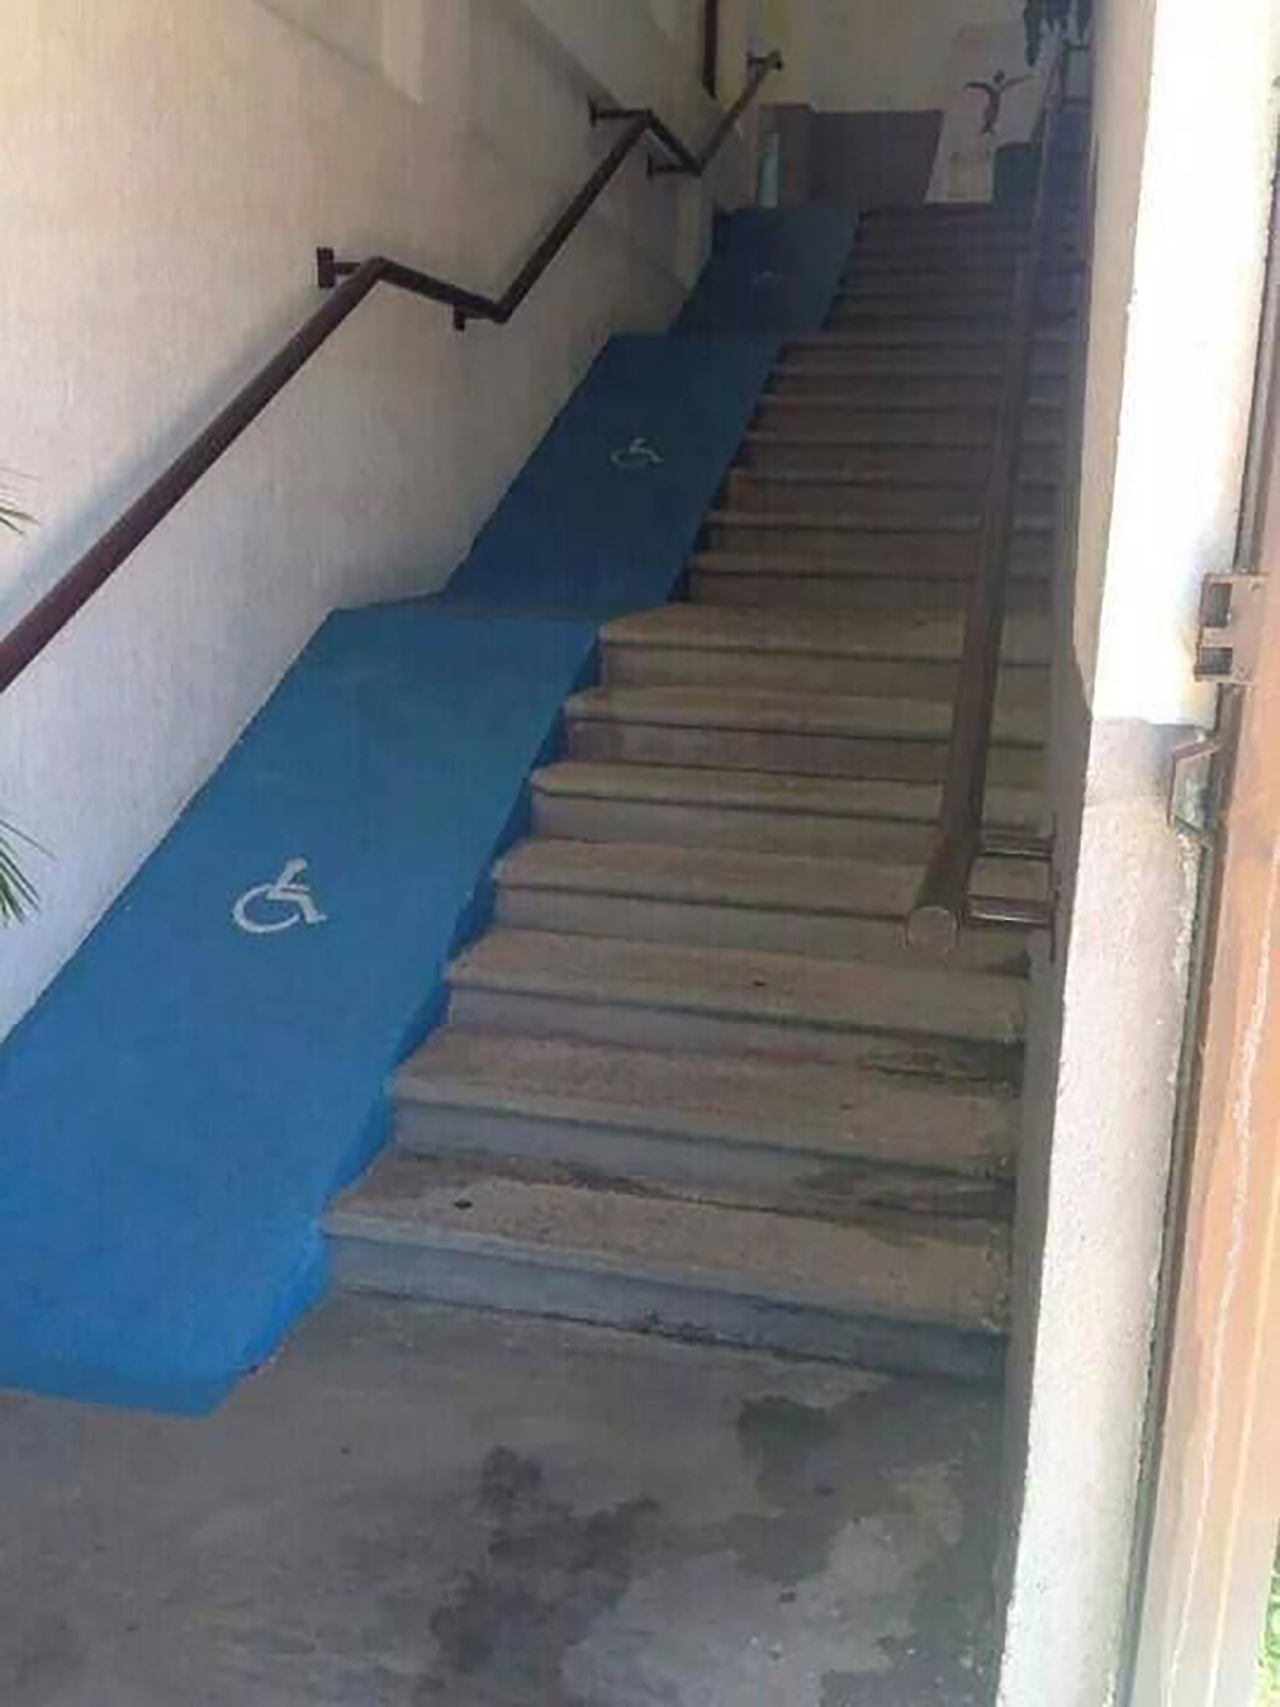 Terrible ramp alongside stairs that no one in a wheelchair could actually use.